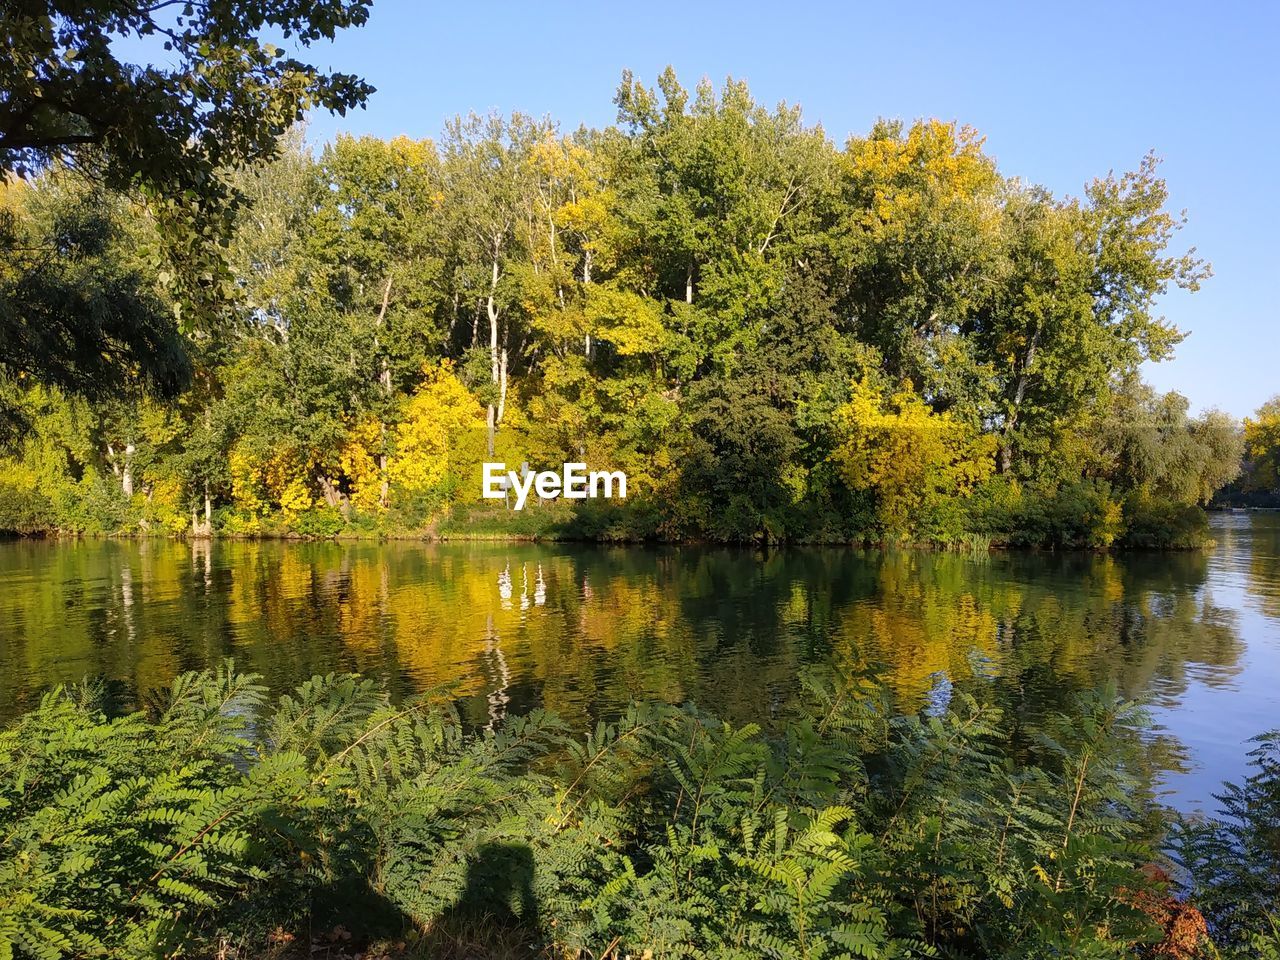 SCENIC VIEW OF LAKE AGAINST TREES